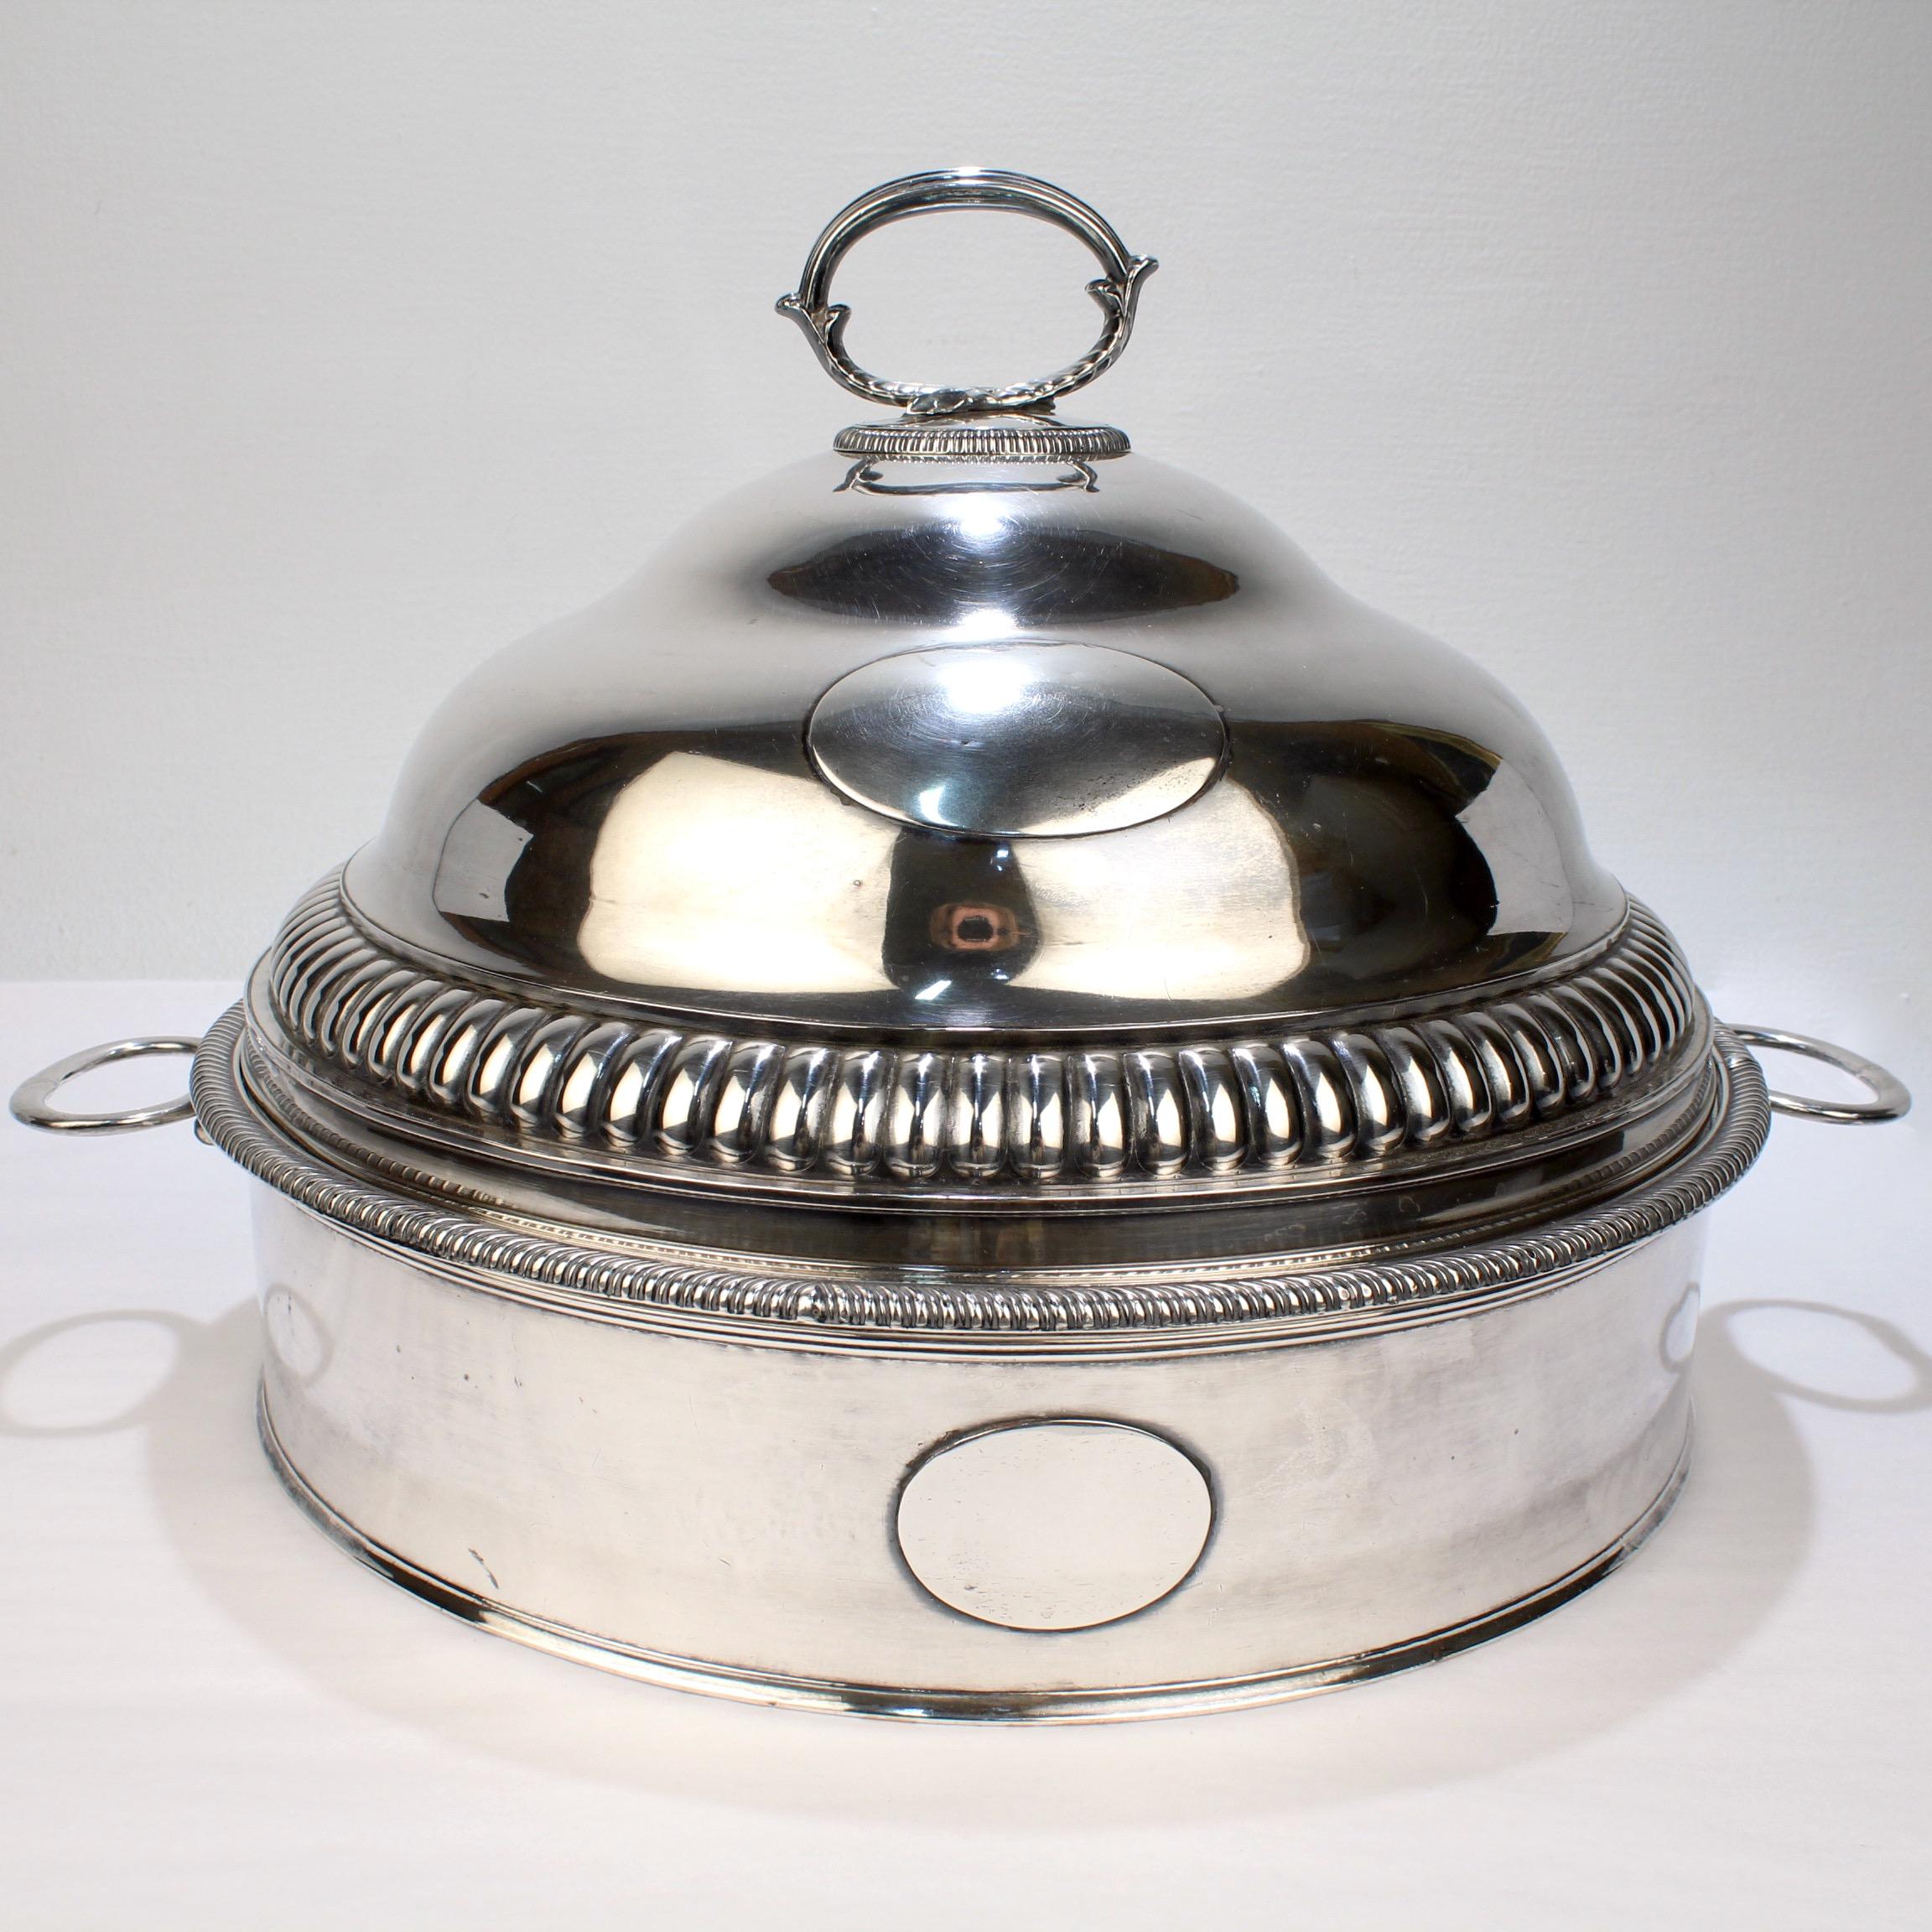 A very fine antique Sheffield silver plate service piece.

A rare and complex serving vessel comprising a handled base with removable liner that allows for warming (or cooling), a 4-section removable divider, and a hand hammered round dome or cover.